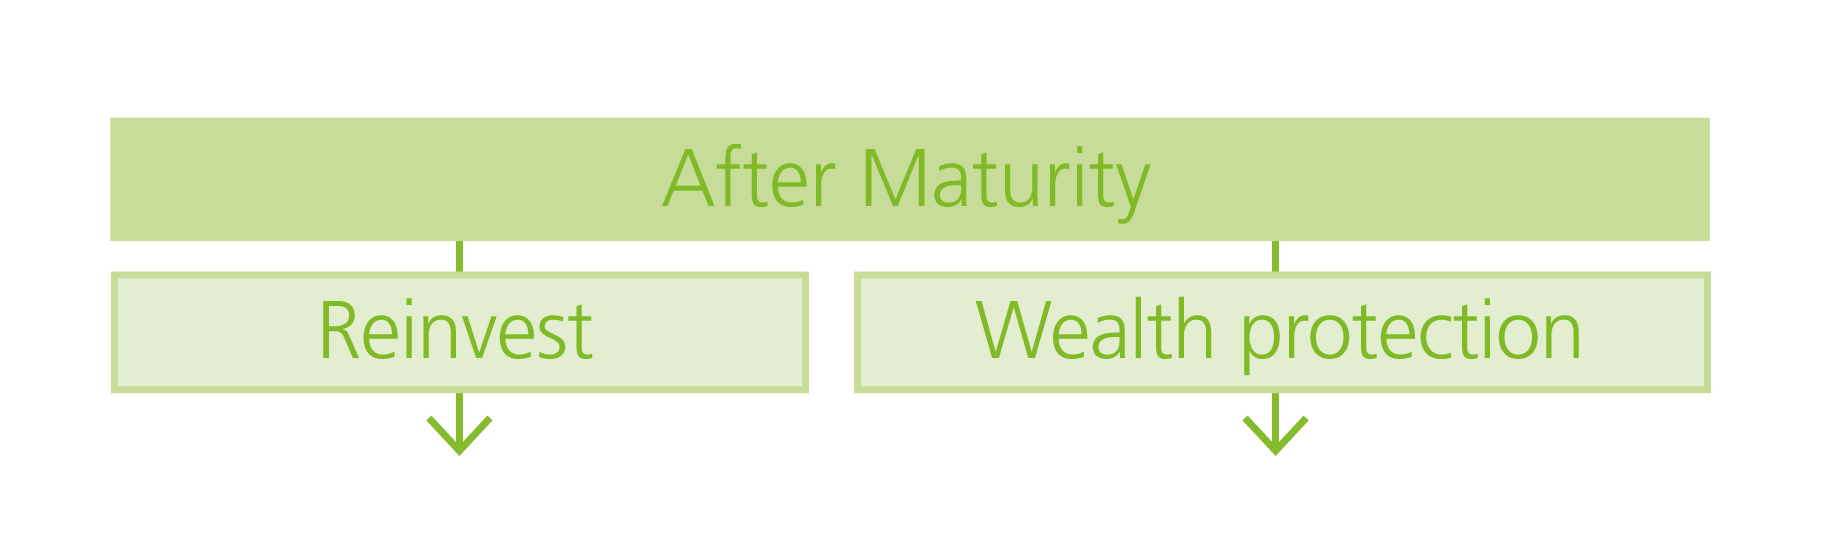 After-Maturity-graphic_White-background-(2).png